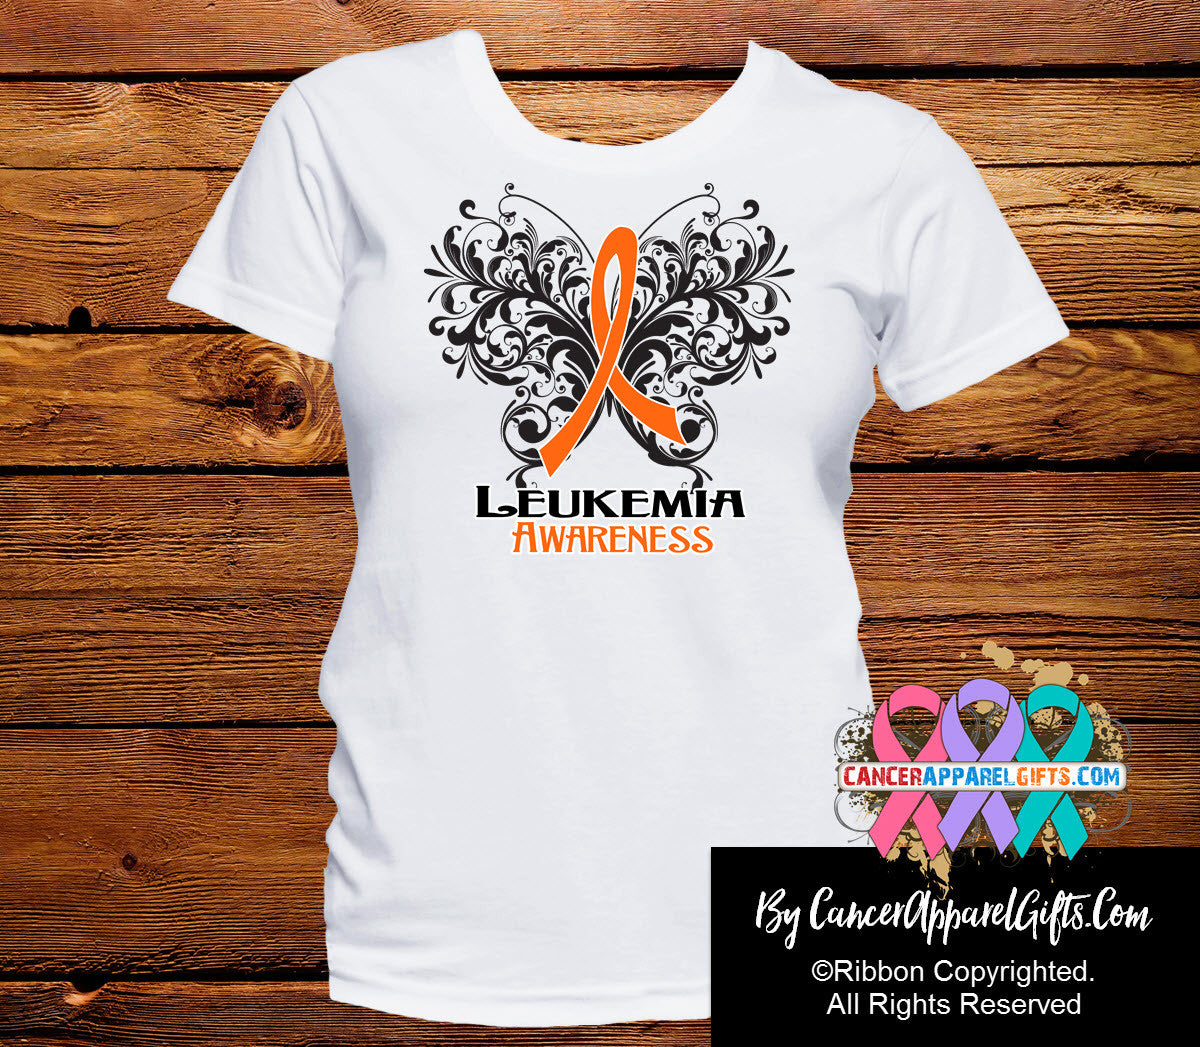 Leukemia Butterfly Ribbon Shirts - Cancer Apparel and Gifts